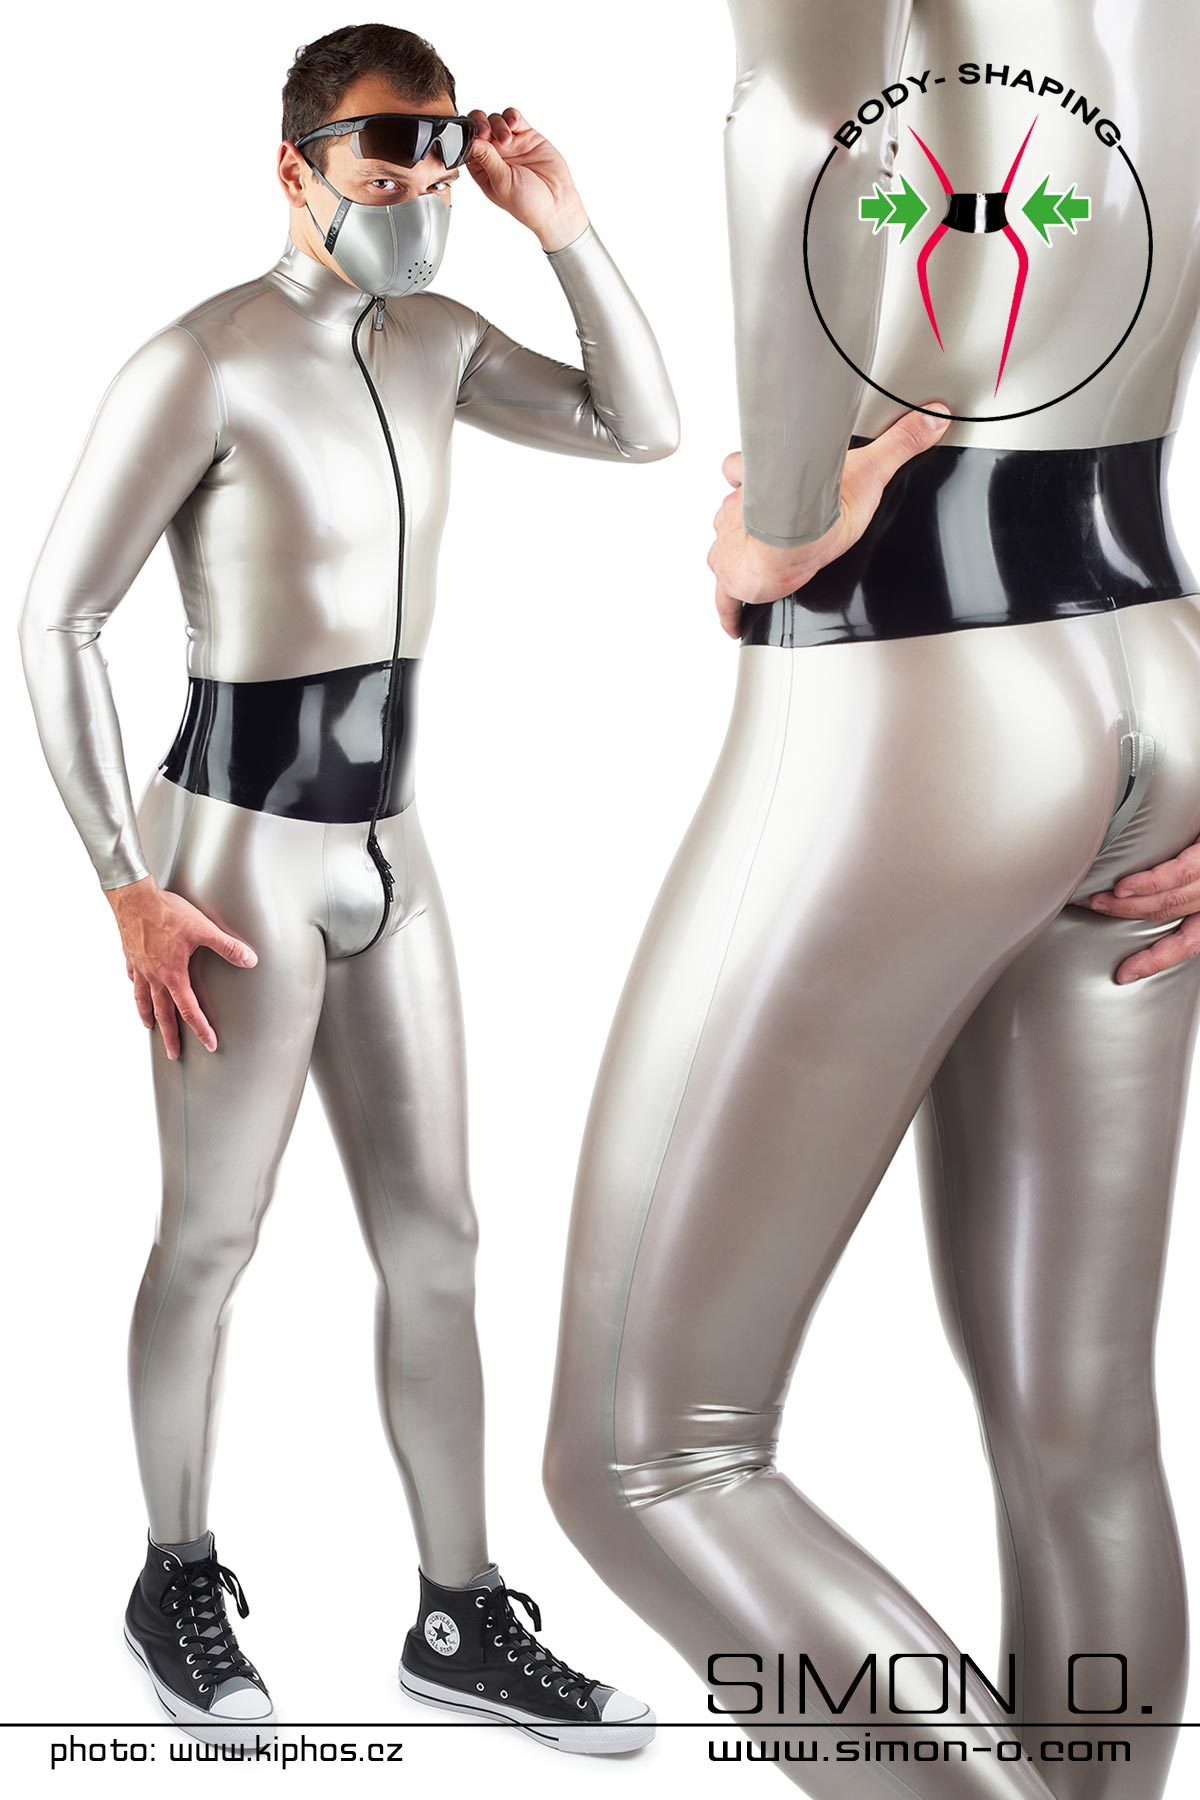 A man wears a shiny latex catsuit in silver with an integrated wide corset belt in black - seen from behind